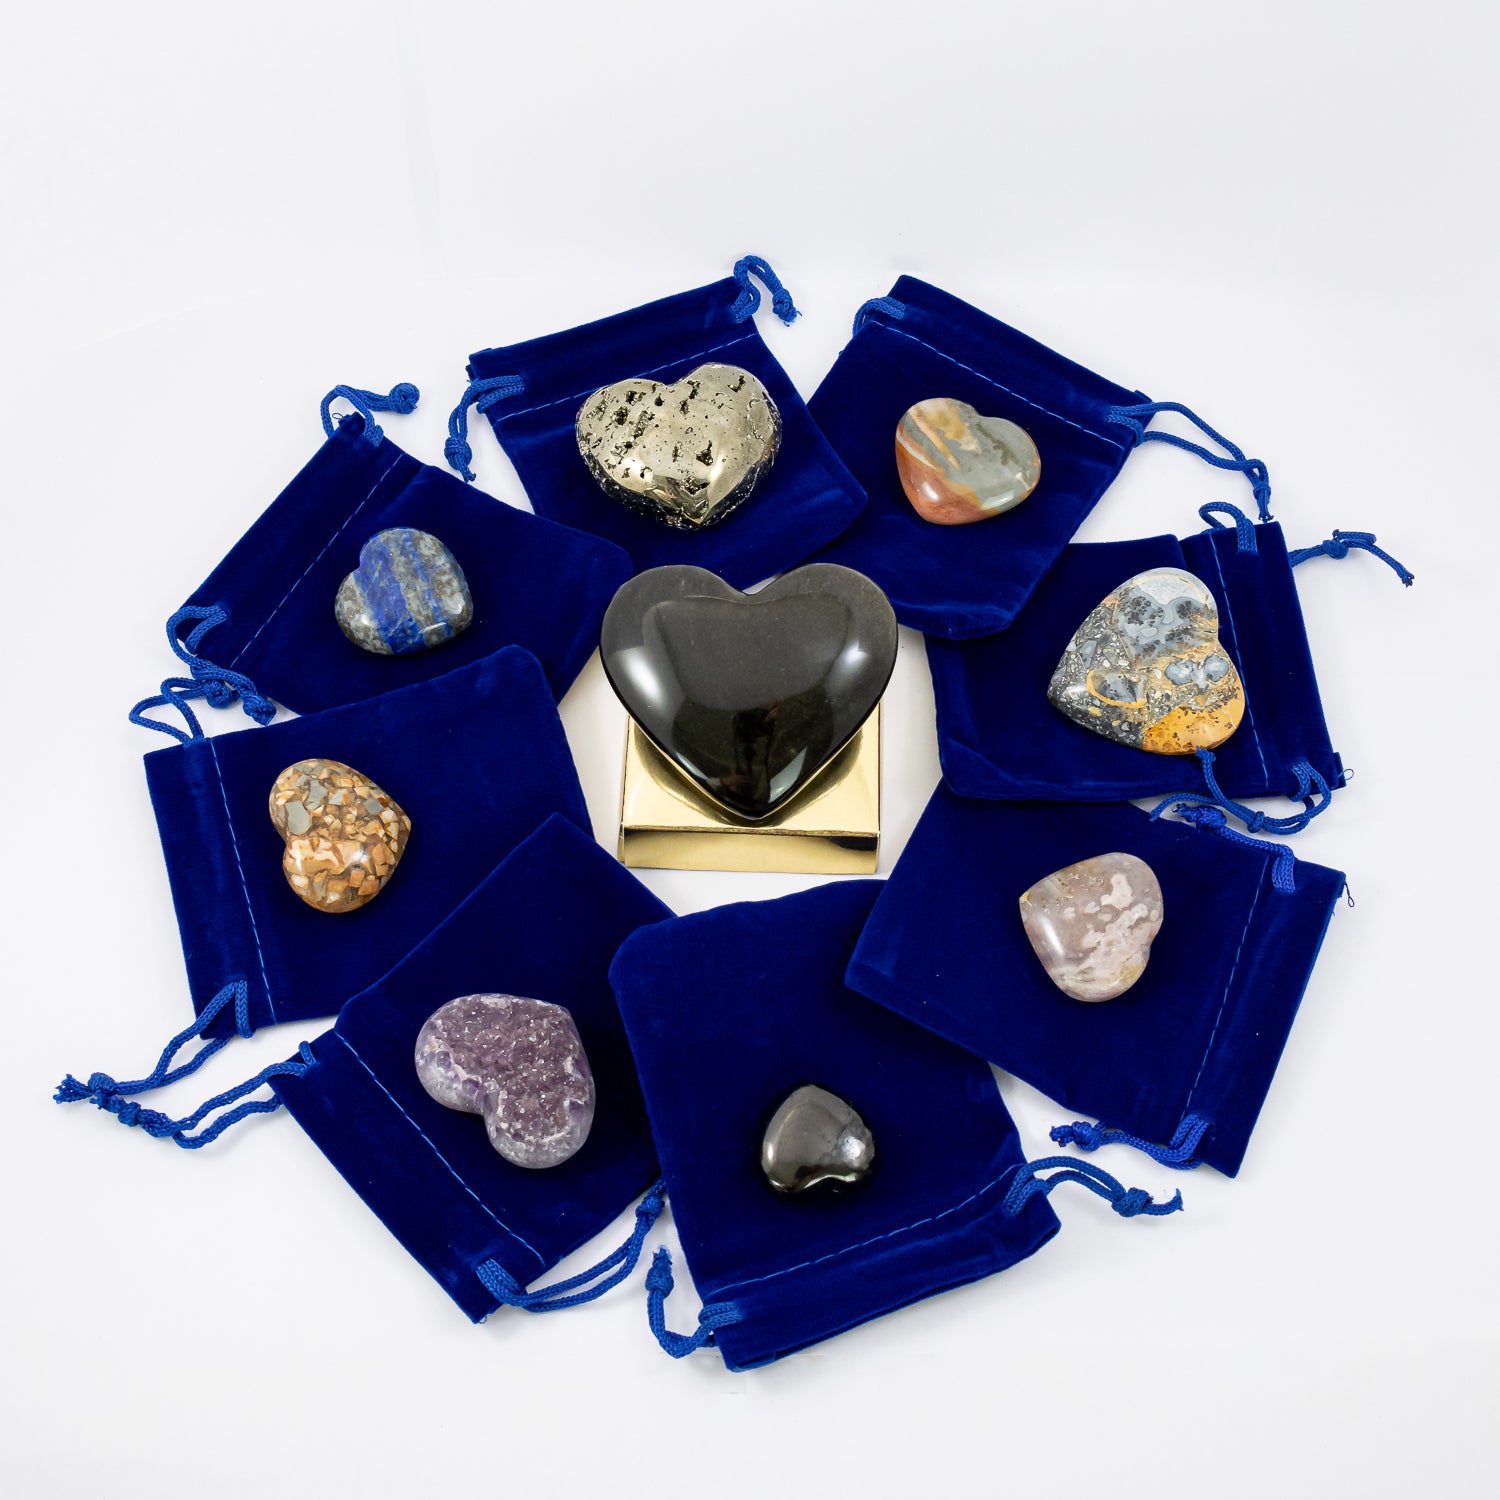 gifts from my heart crystal set (with blue velvet bags). amethyst crystal druzy heart, flower agate crystal heart, lapis lazuli crystal heart, polychrome jasper crystal heart, pyrite crystal heart , sheen obsidian crystal heart, shungite crystal heart, maligano jasper crystal heart, ibis jasper crystal heart.